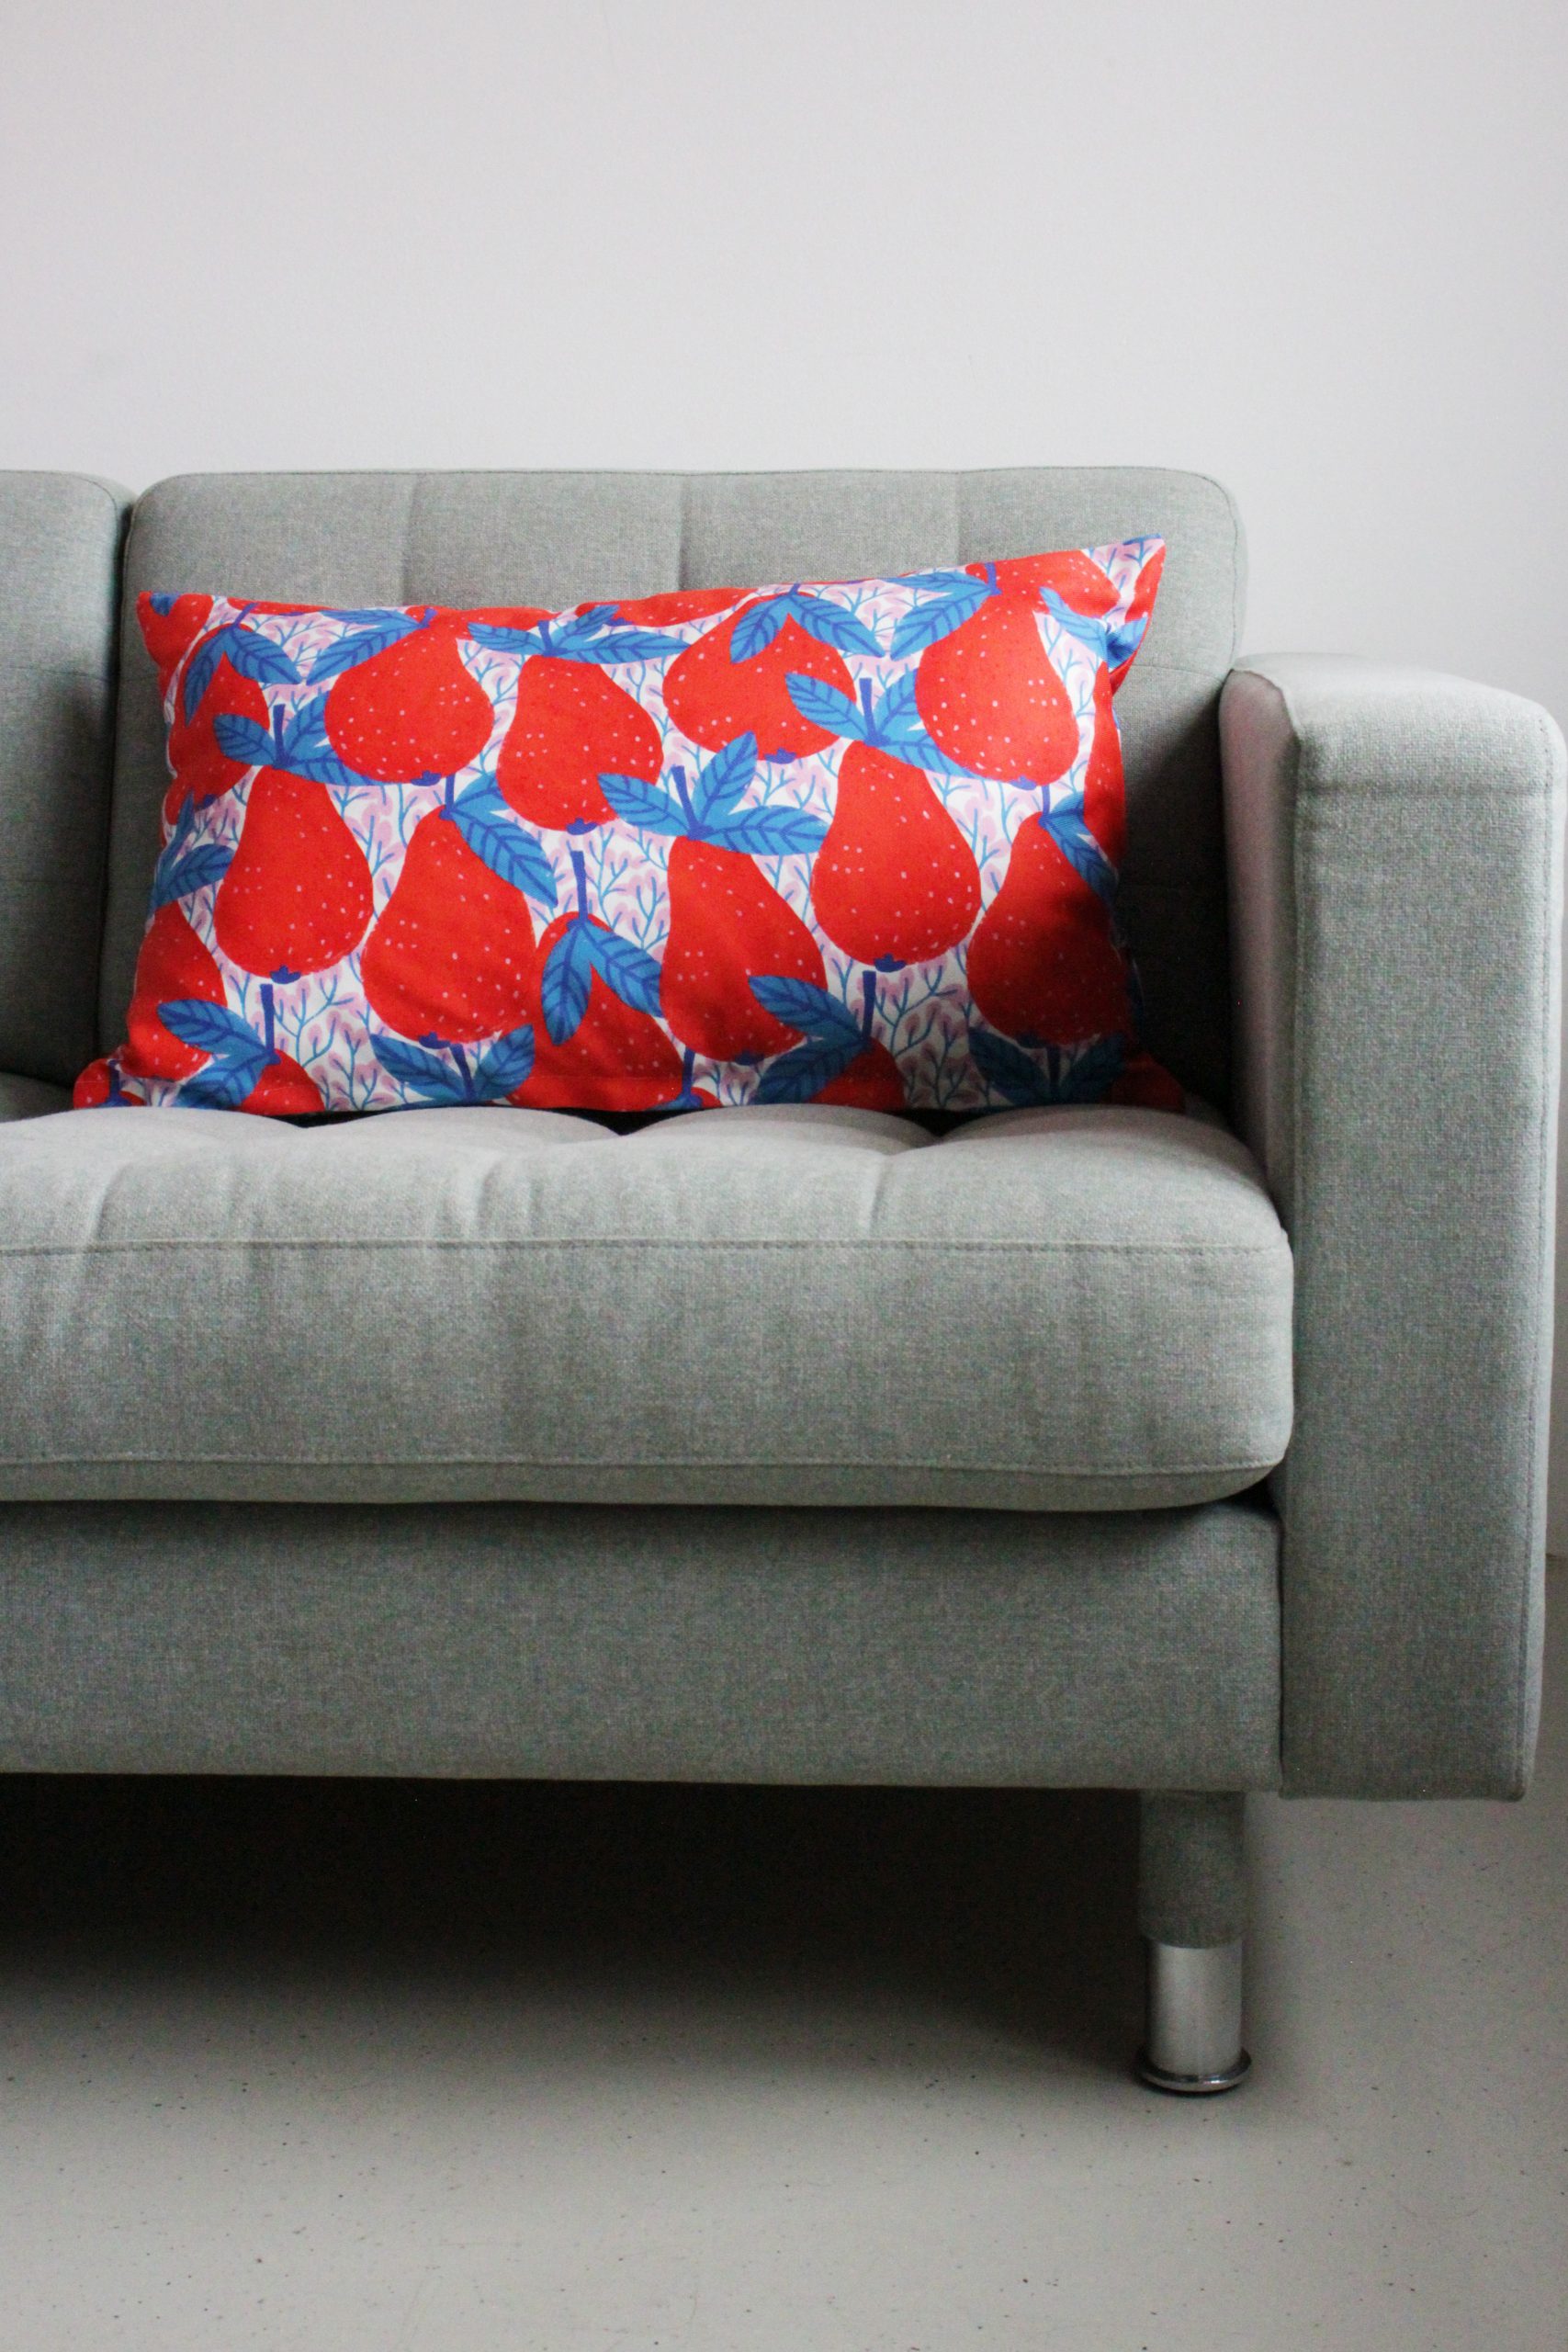 grey sofa and colorful personalized pillow